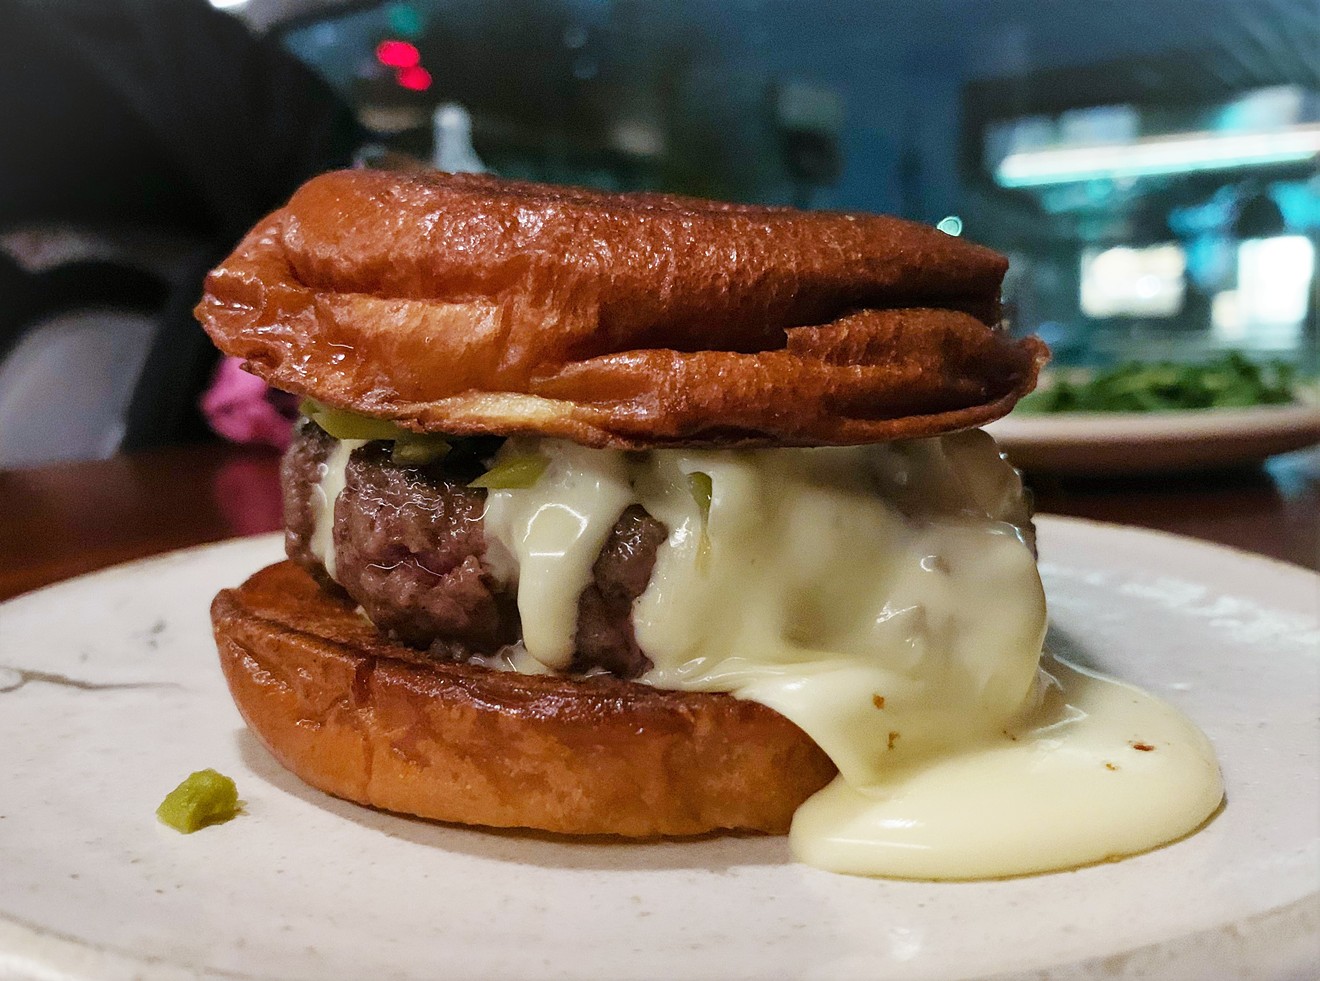 Oozing with butter and raclette cheese, Squable's French cheeseburger is a stunner.